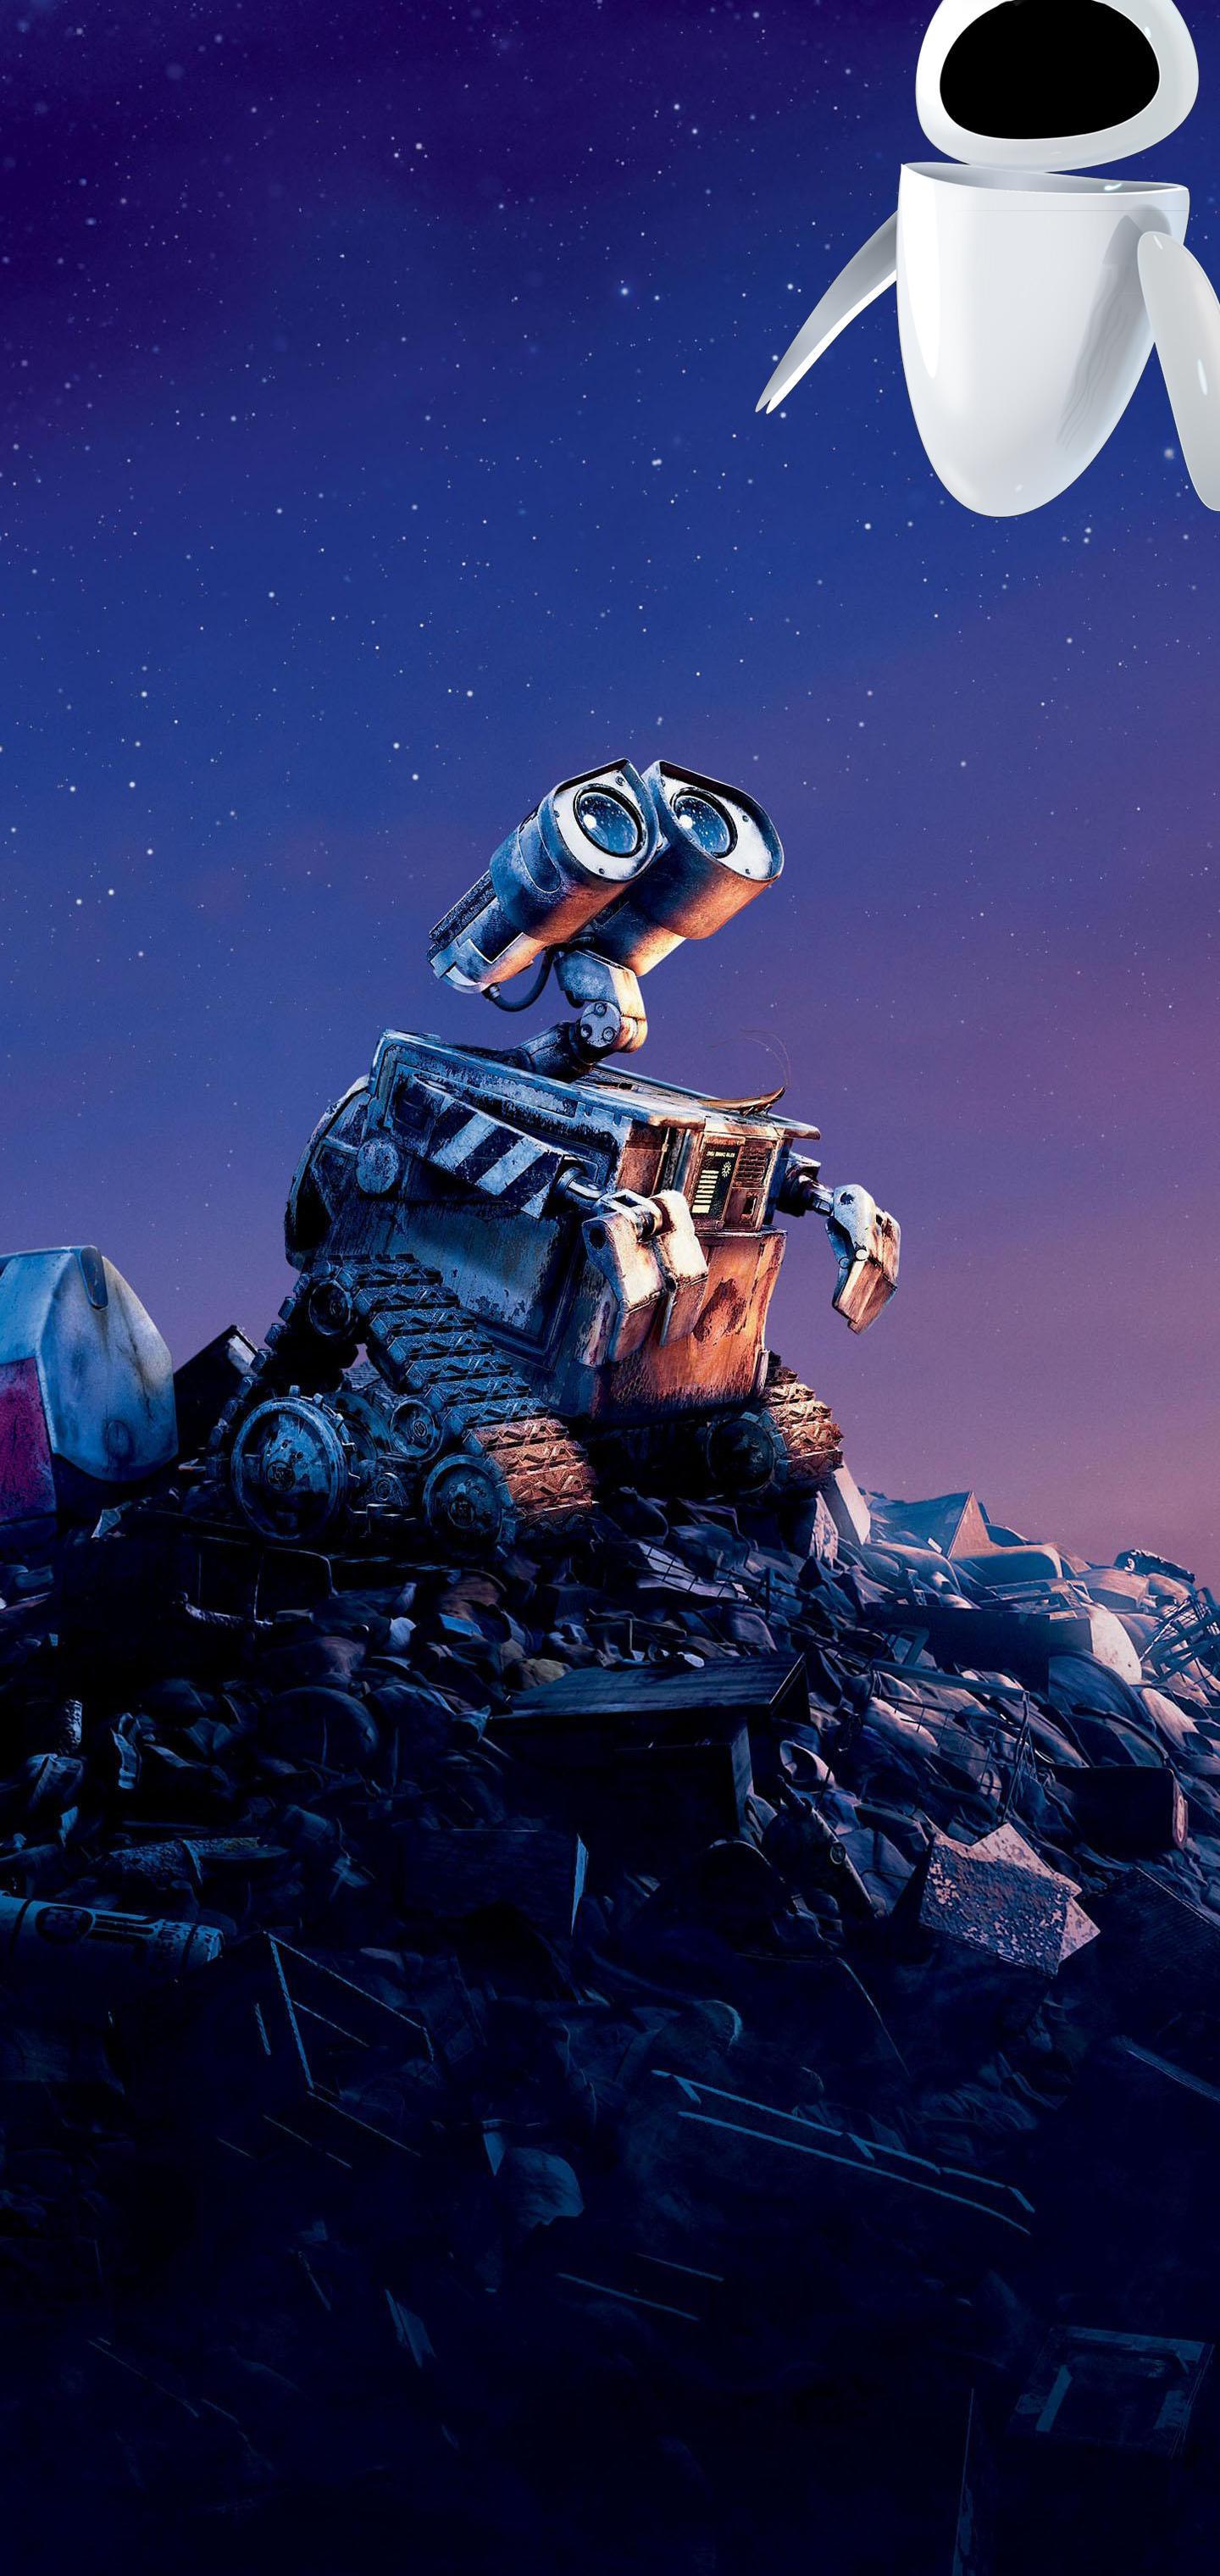 Wall E And EVE By XSmaxMode Galaxy S10 .galaxys10wallpaper.com